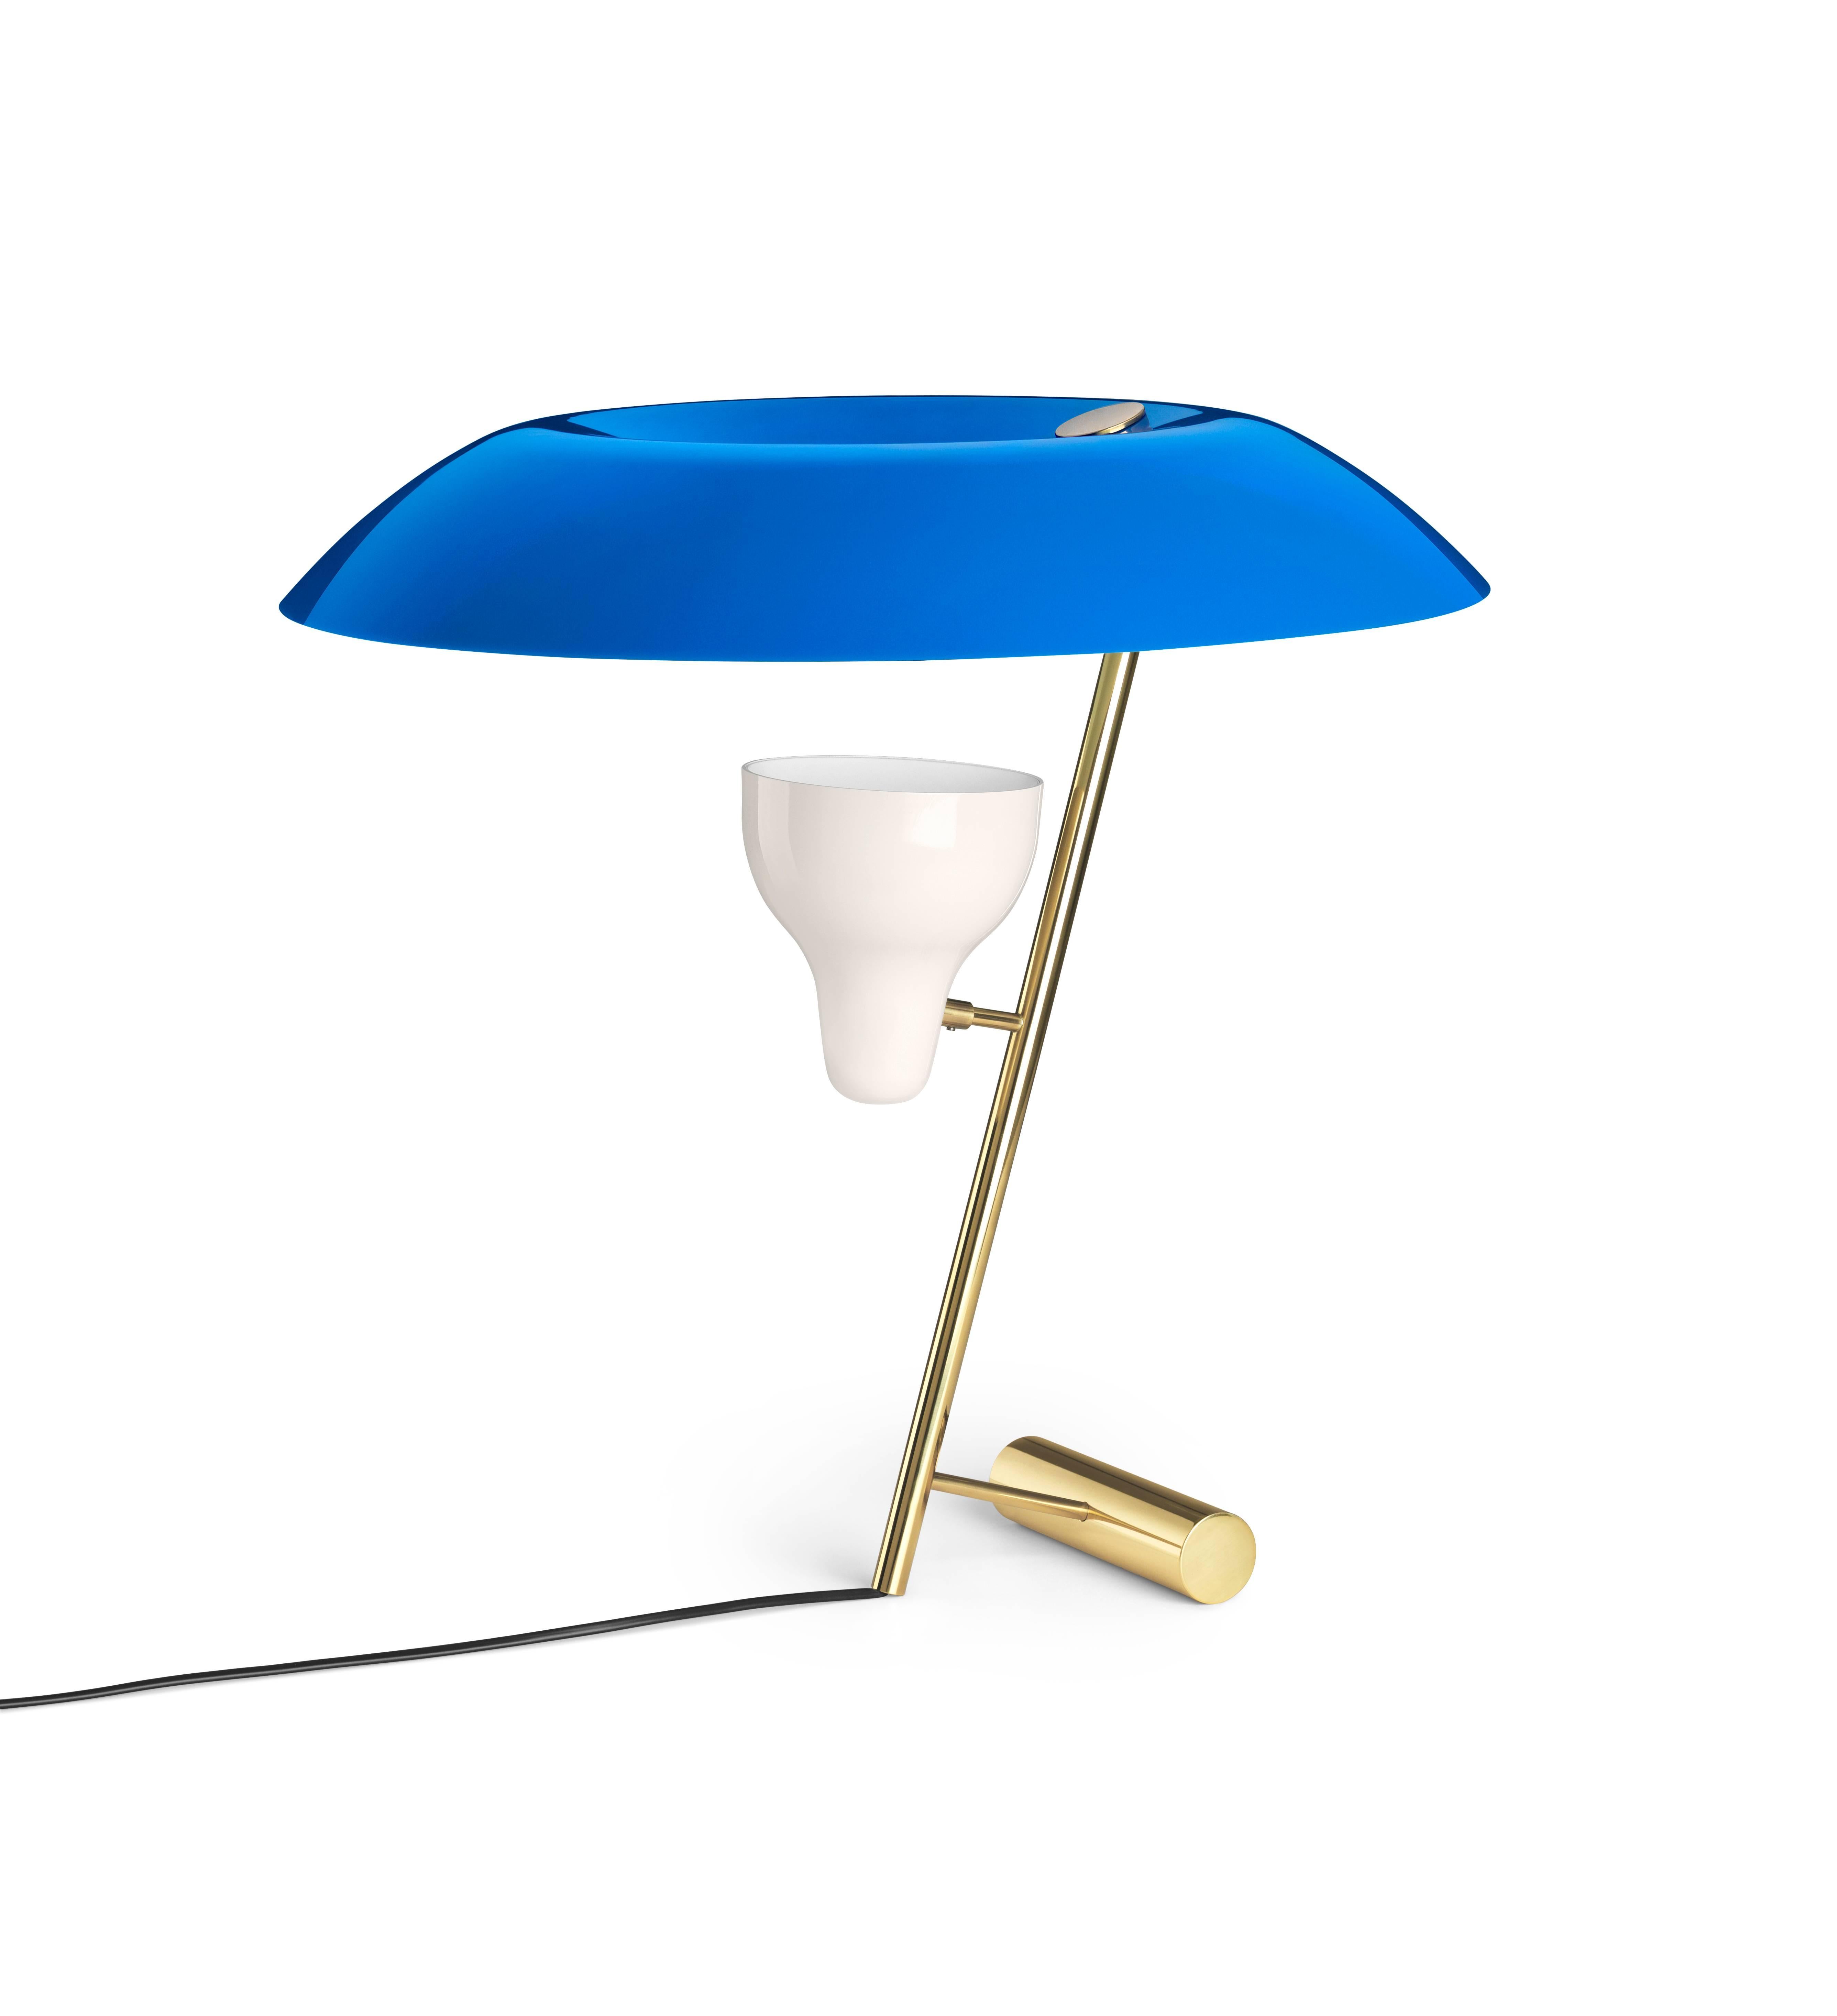 Gino Sarfatti Model #548 table lamp in blue and polished brass. 

Designed in 1951, this is an authorized re-edition by Alessandro Sarfatti, grandson of Gino Sarfatti, who applies his grandfather's scrupulous attention to detail and materials to